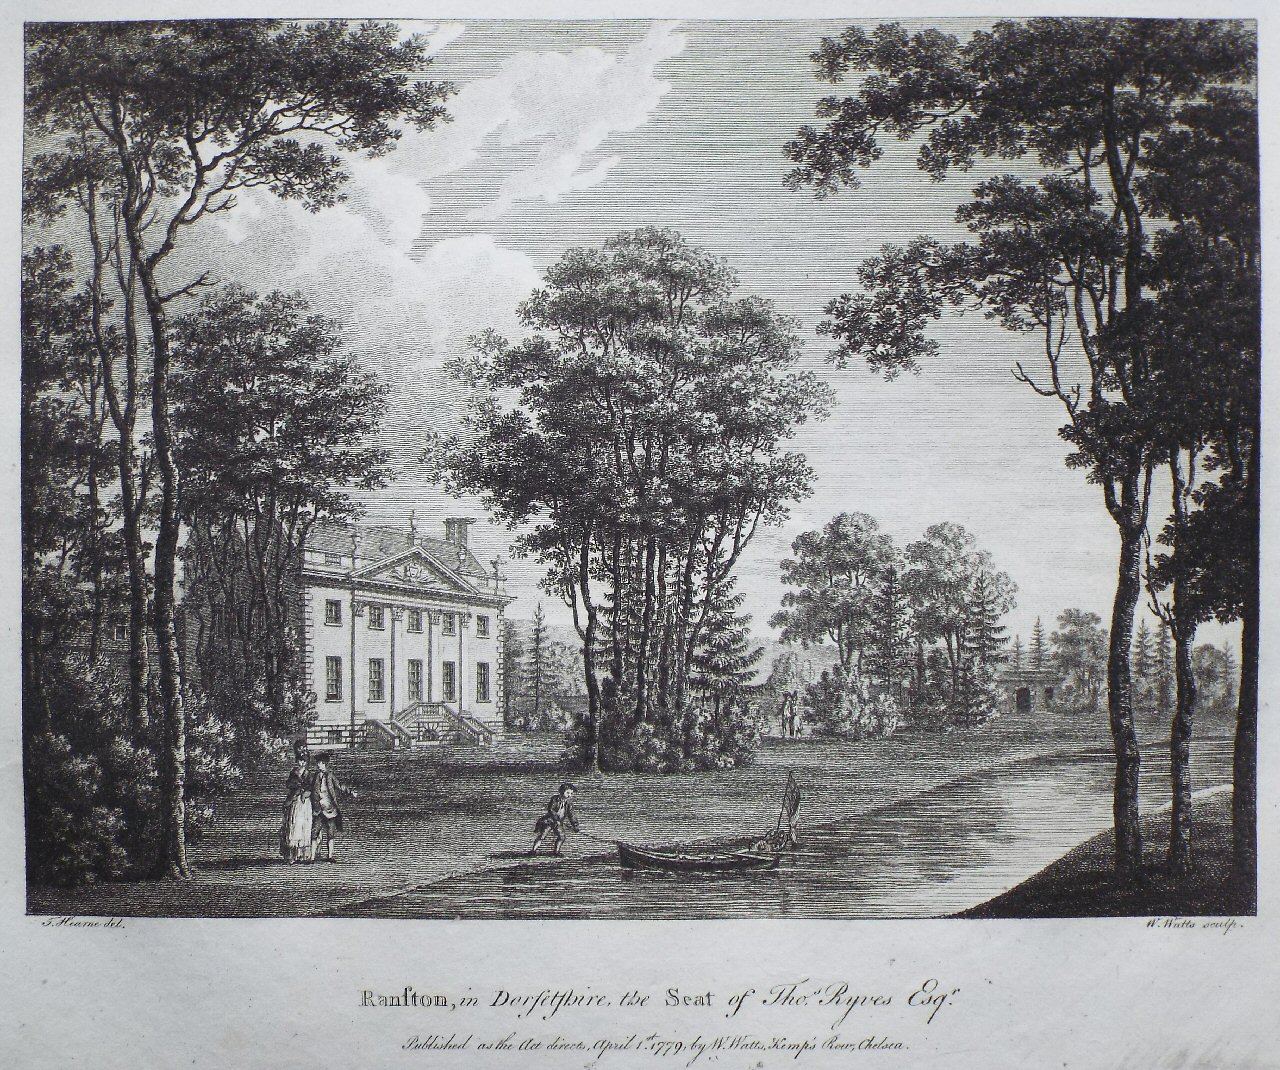 Print - Ranston, in Dorsetshire, the Seat of Thos Ryves Esqr - Watts